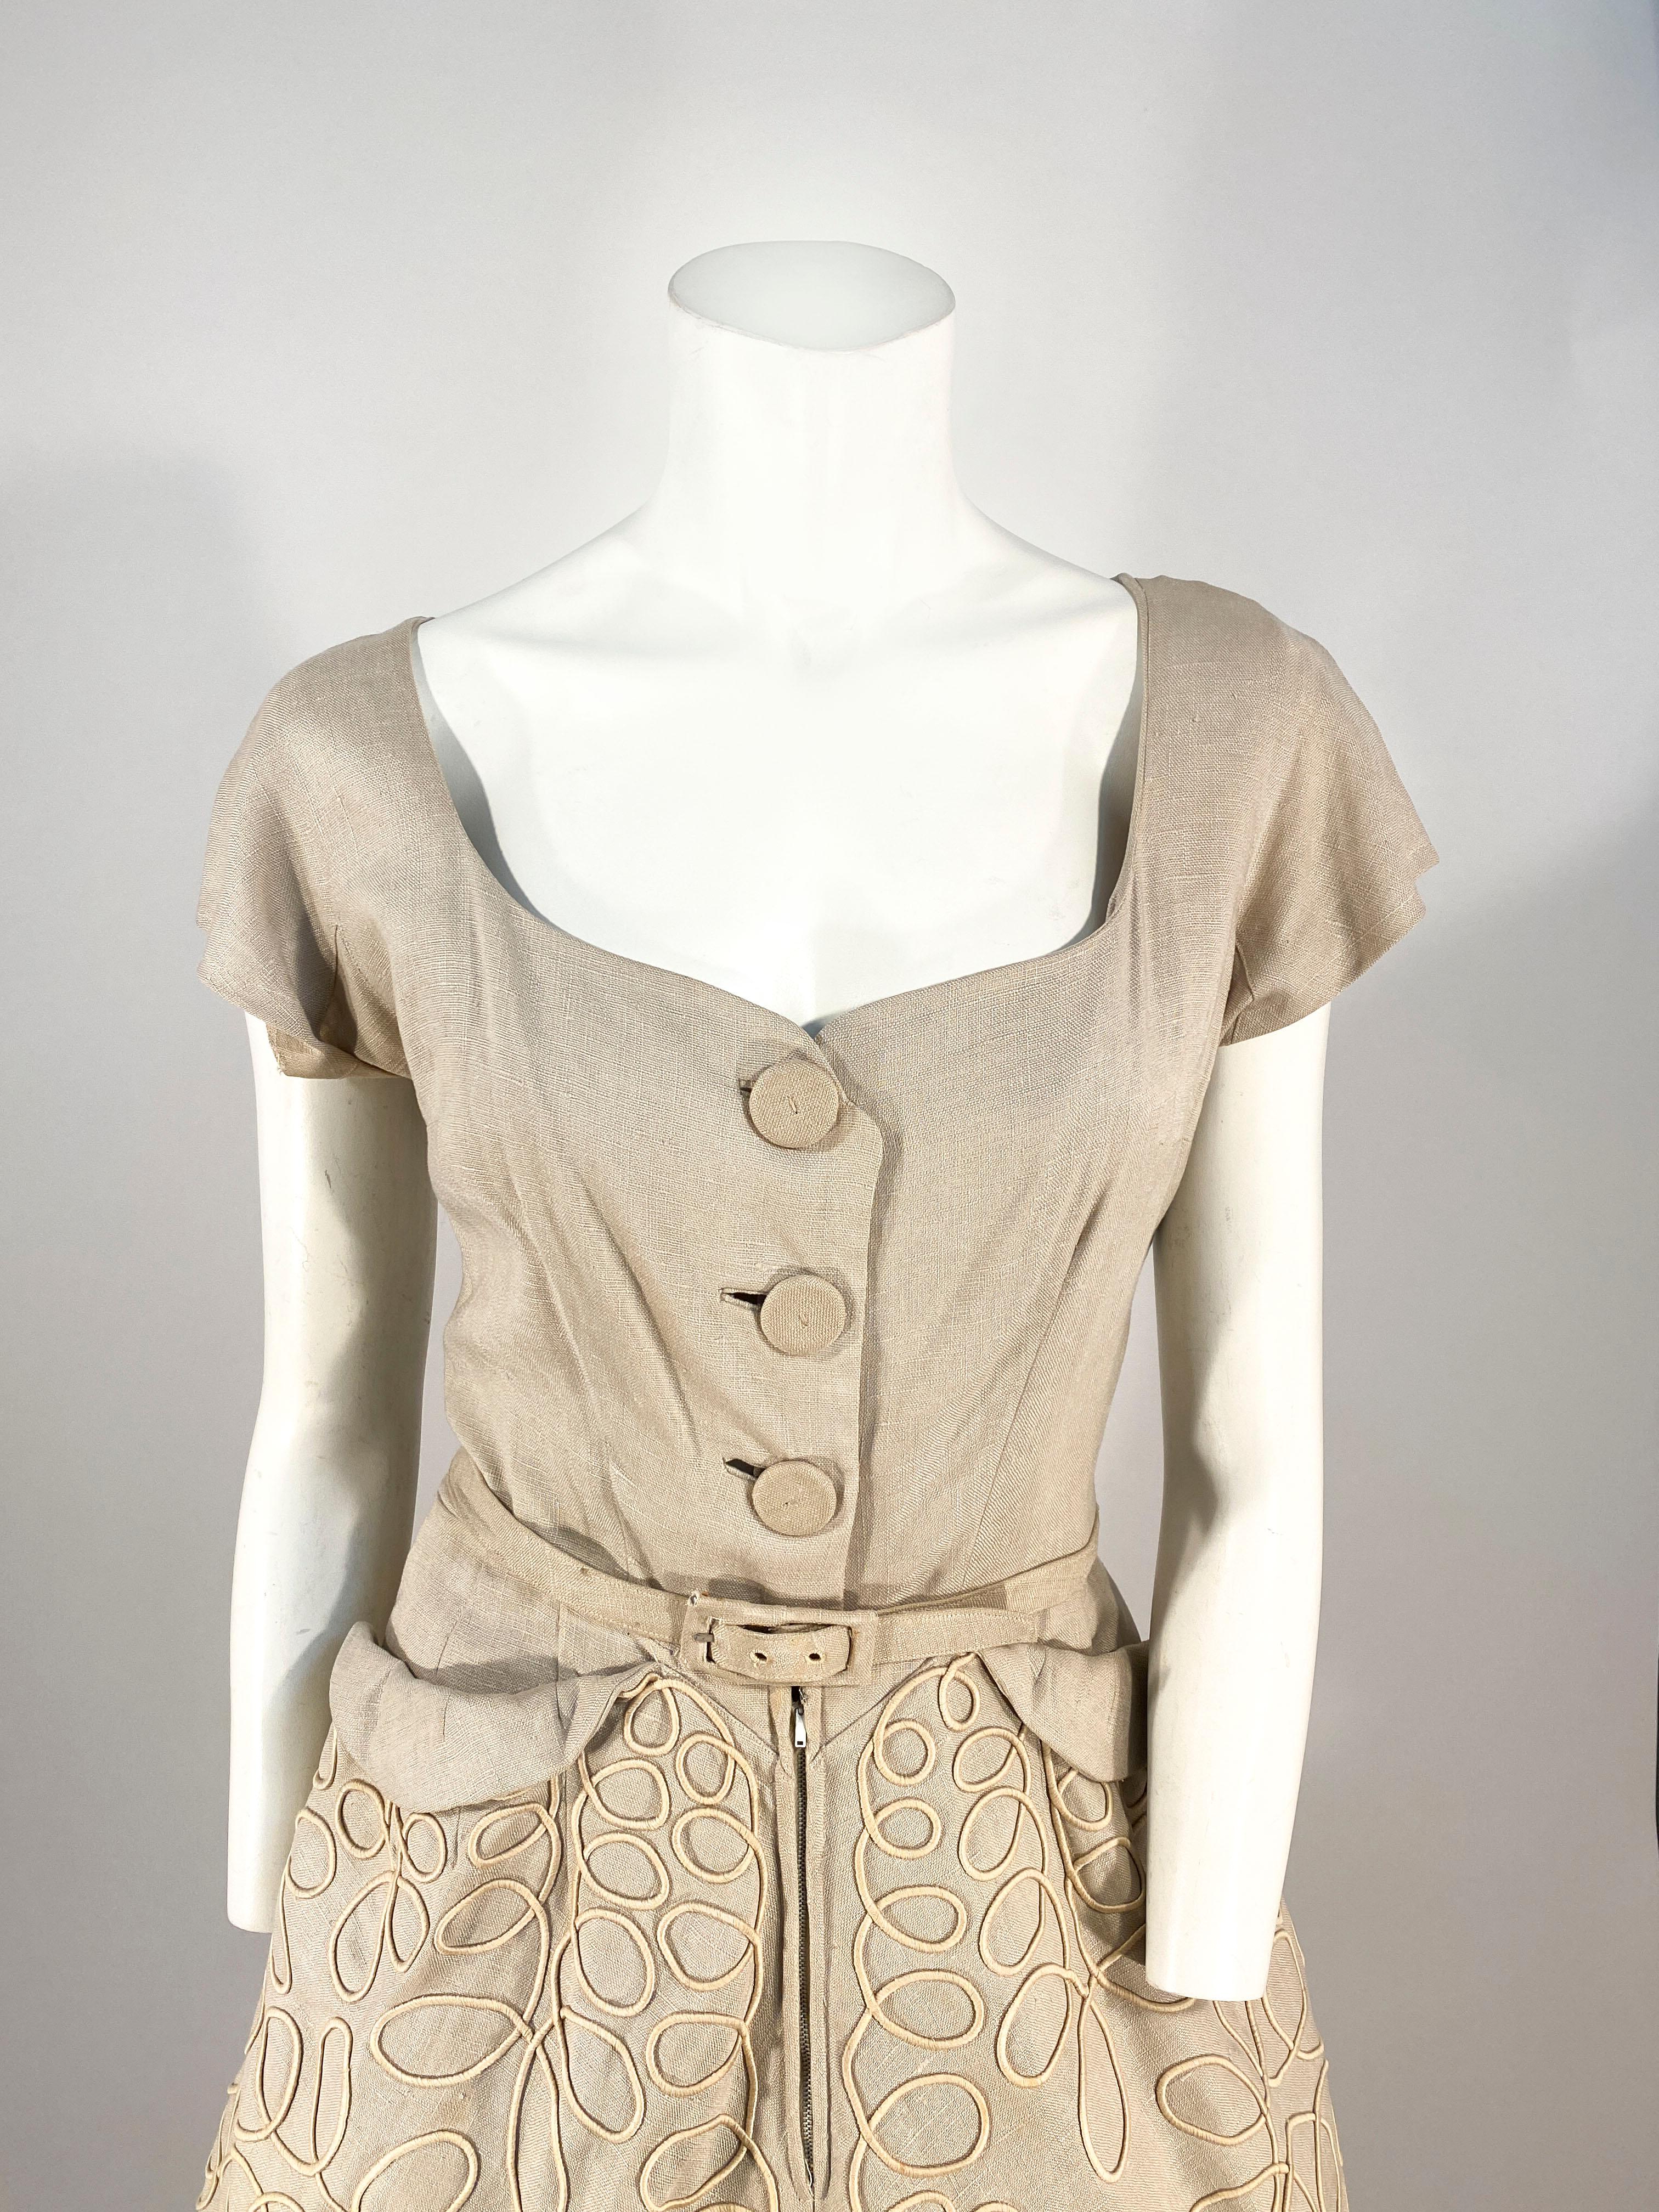 1950s Beige Linen day dress with a front covered button closure and a hidden zipper along the skirt. There is decorative lopped piping covering the entire surface area of the skirt. The bodice has short cap sleeves and a structured gusset and